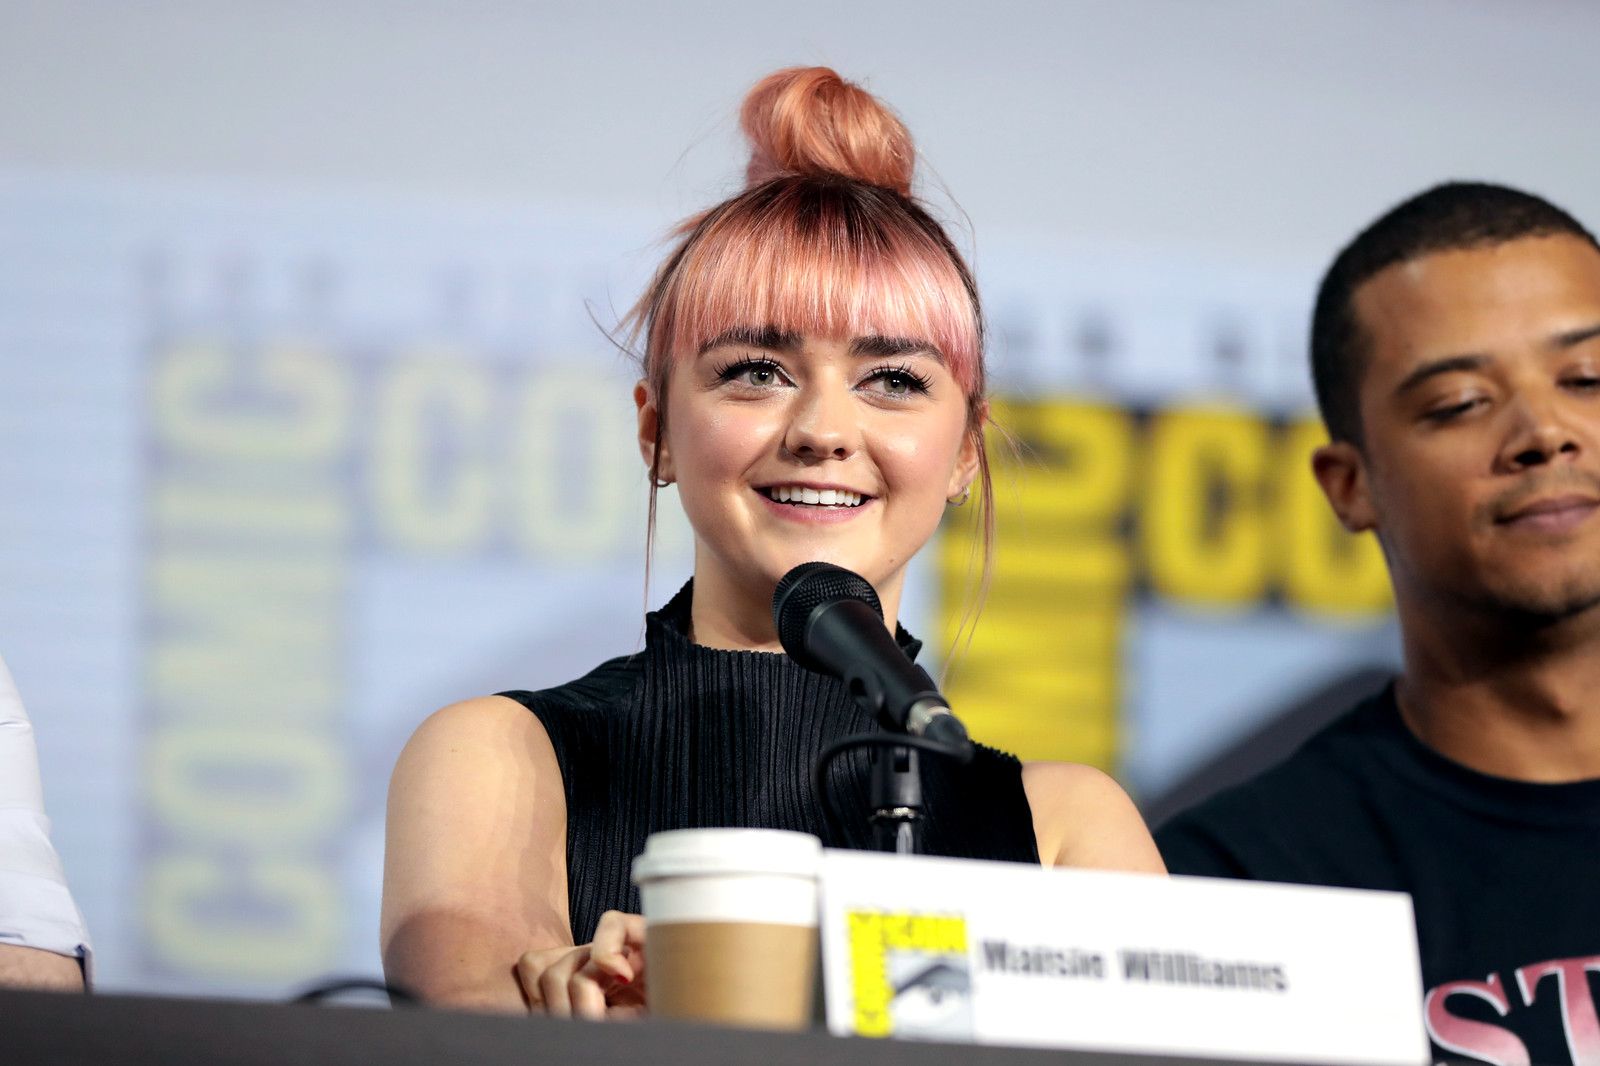 Maisie Williams speaking at the 2019 San Diego Comic Con International, for "Game of Thrones", at the San Diego Convention Center in San Diego, California